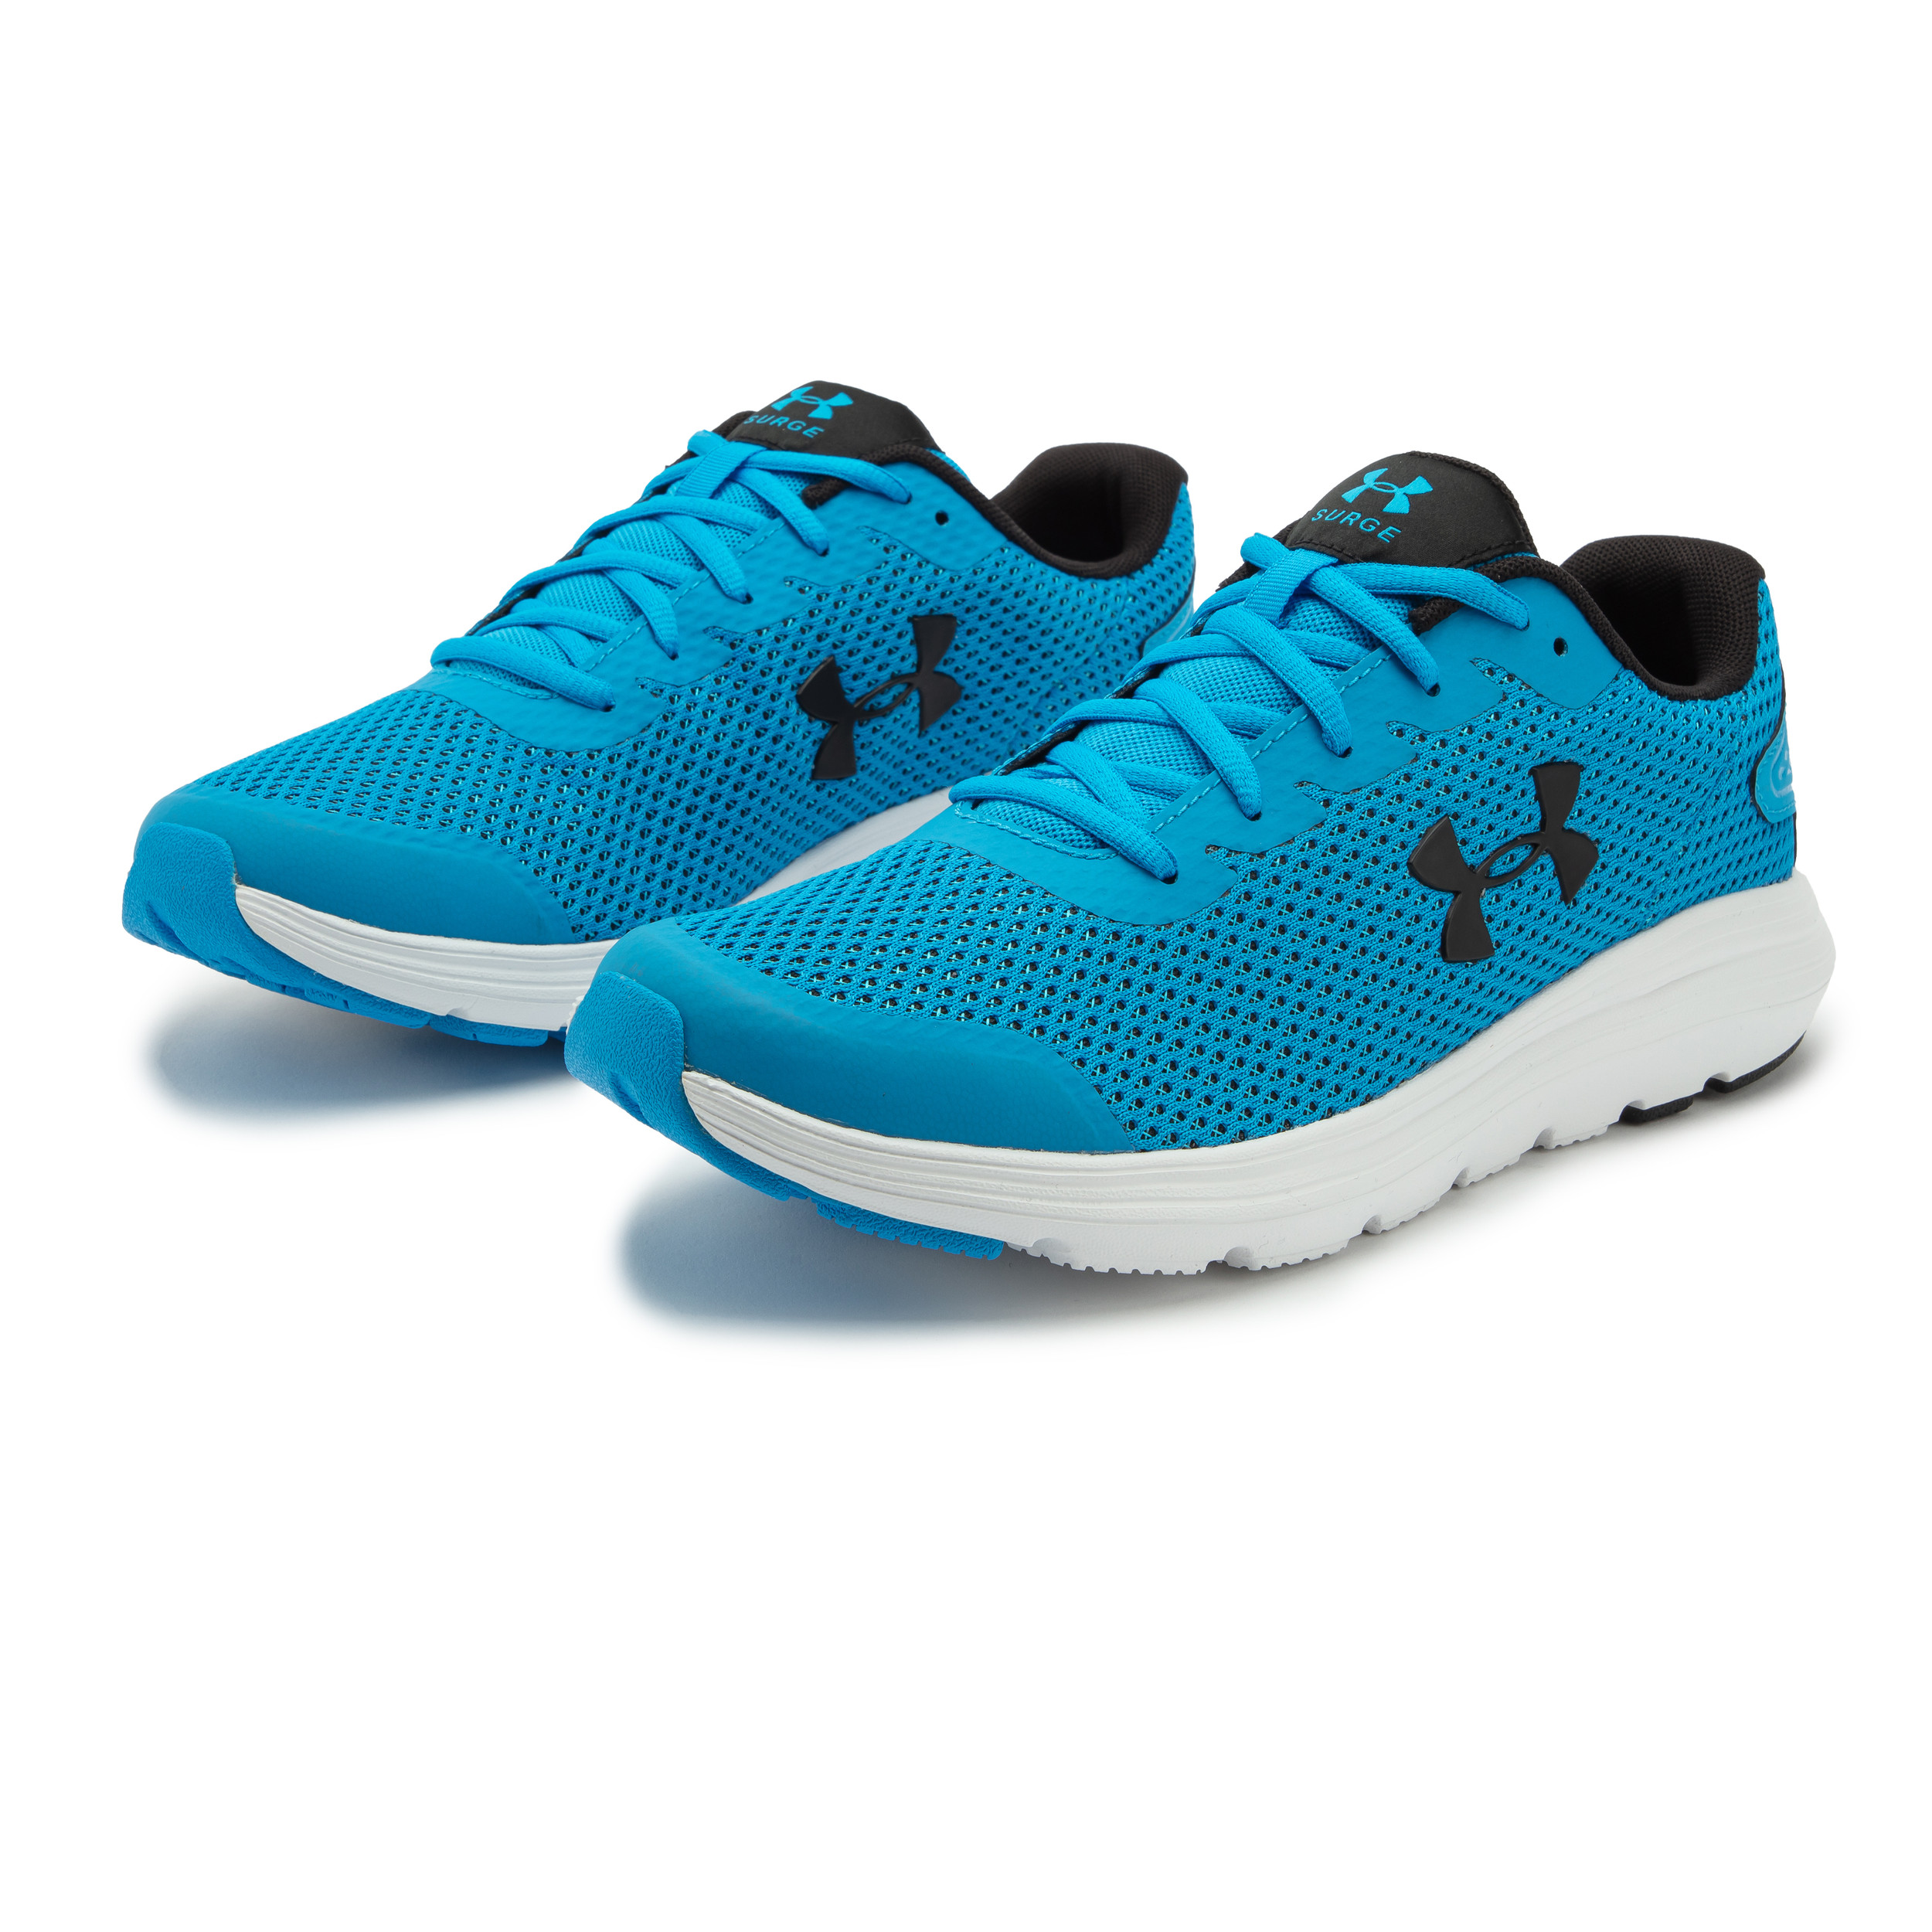 Under Armour Surge 2 Running Shoes - AW20